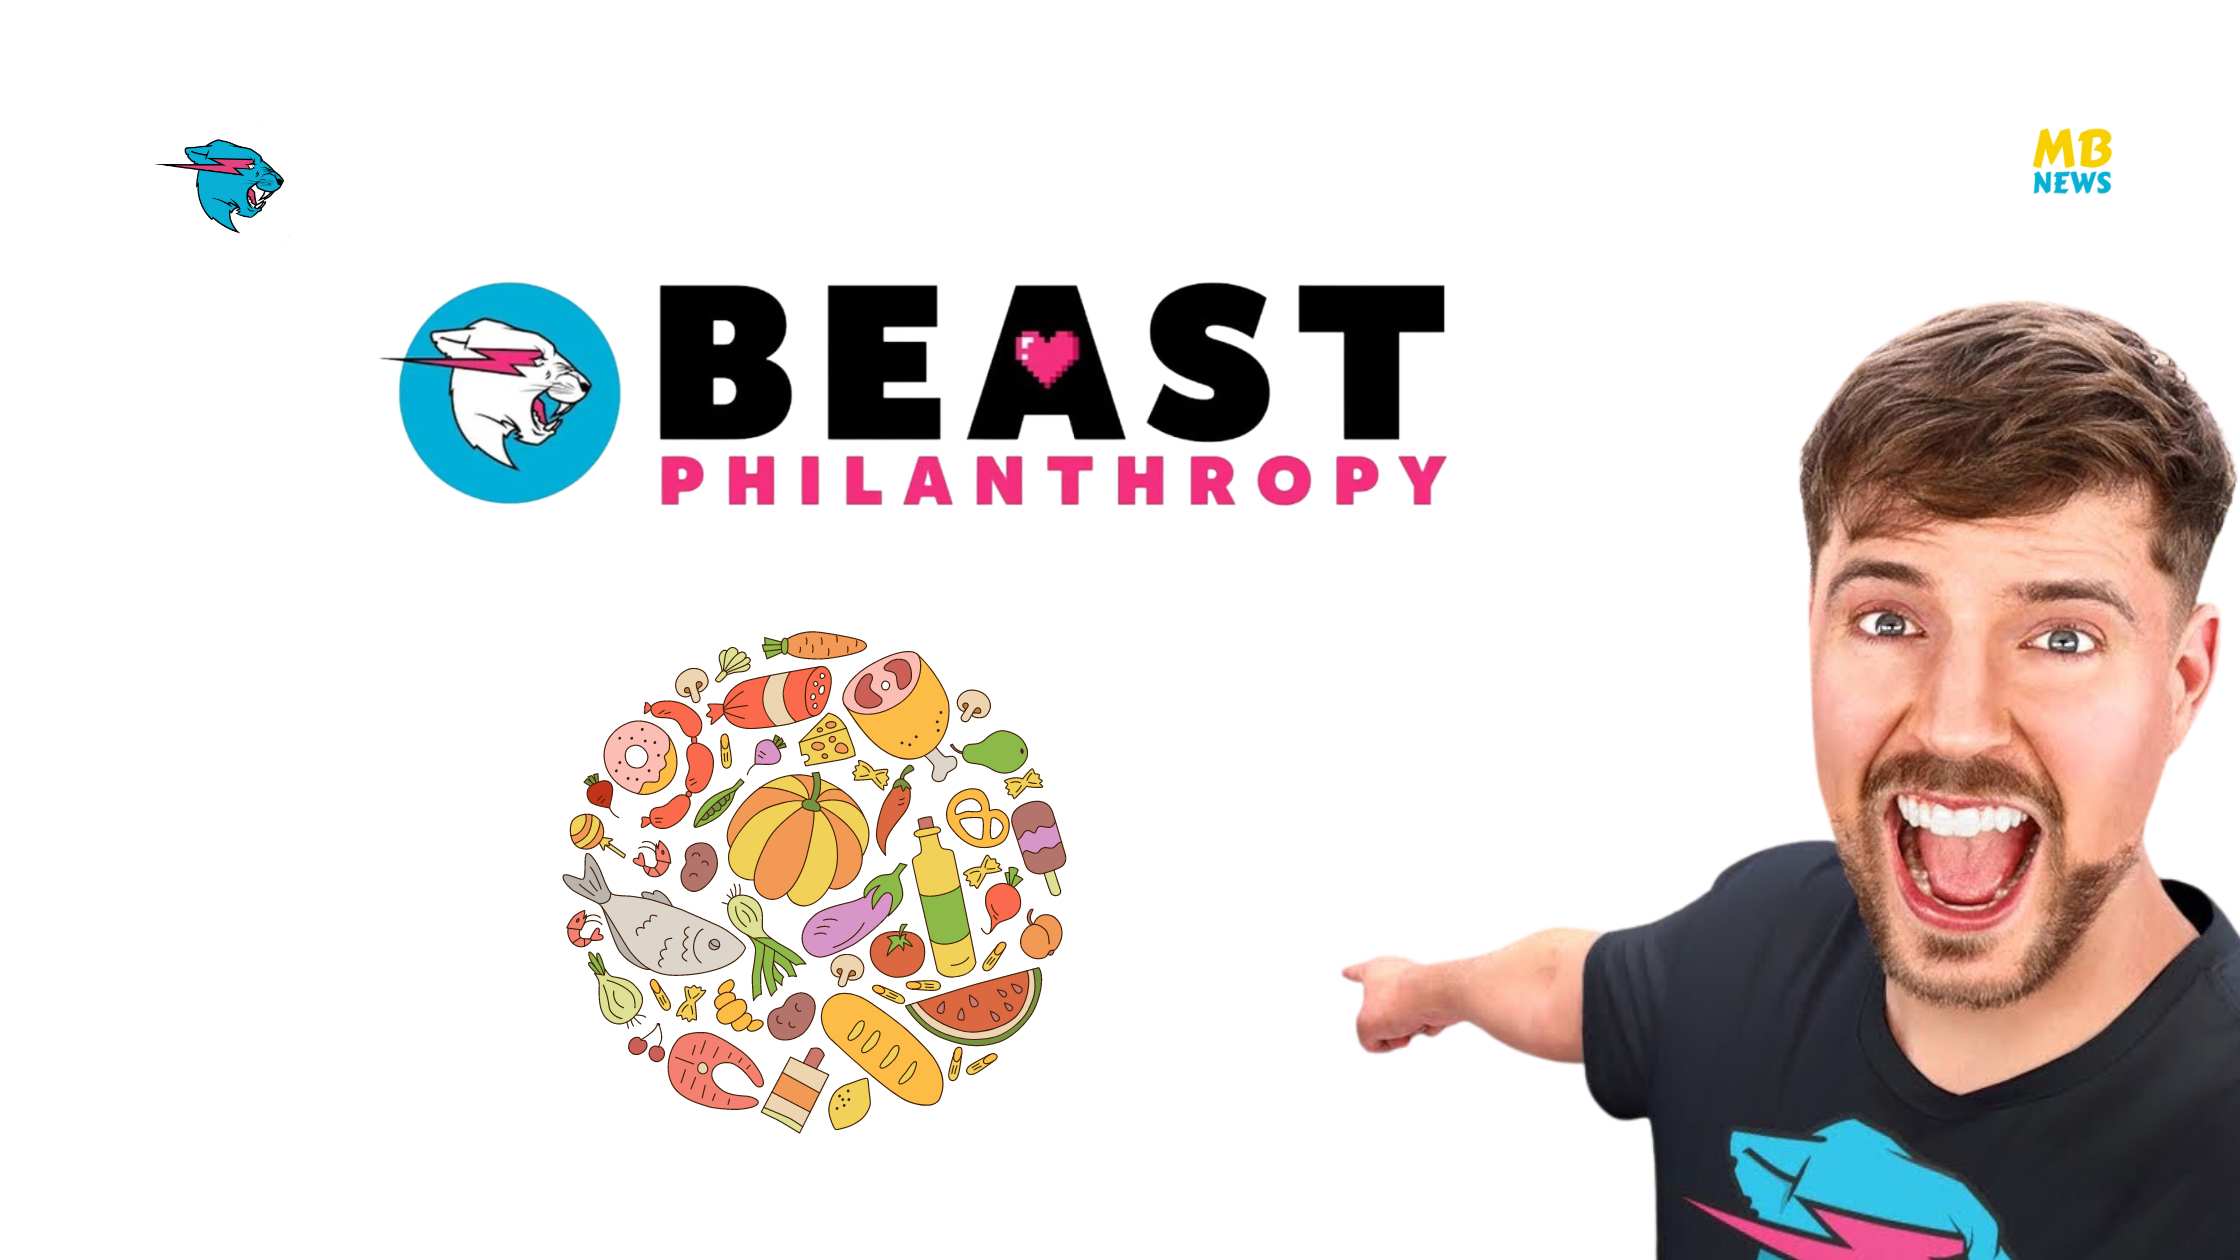 800 Million Still Hungry: MrBeast's Beast Philanthropy Takes a Stand Against Global Hunger!